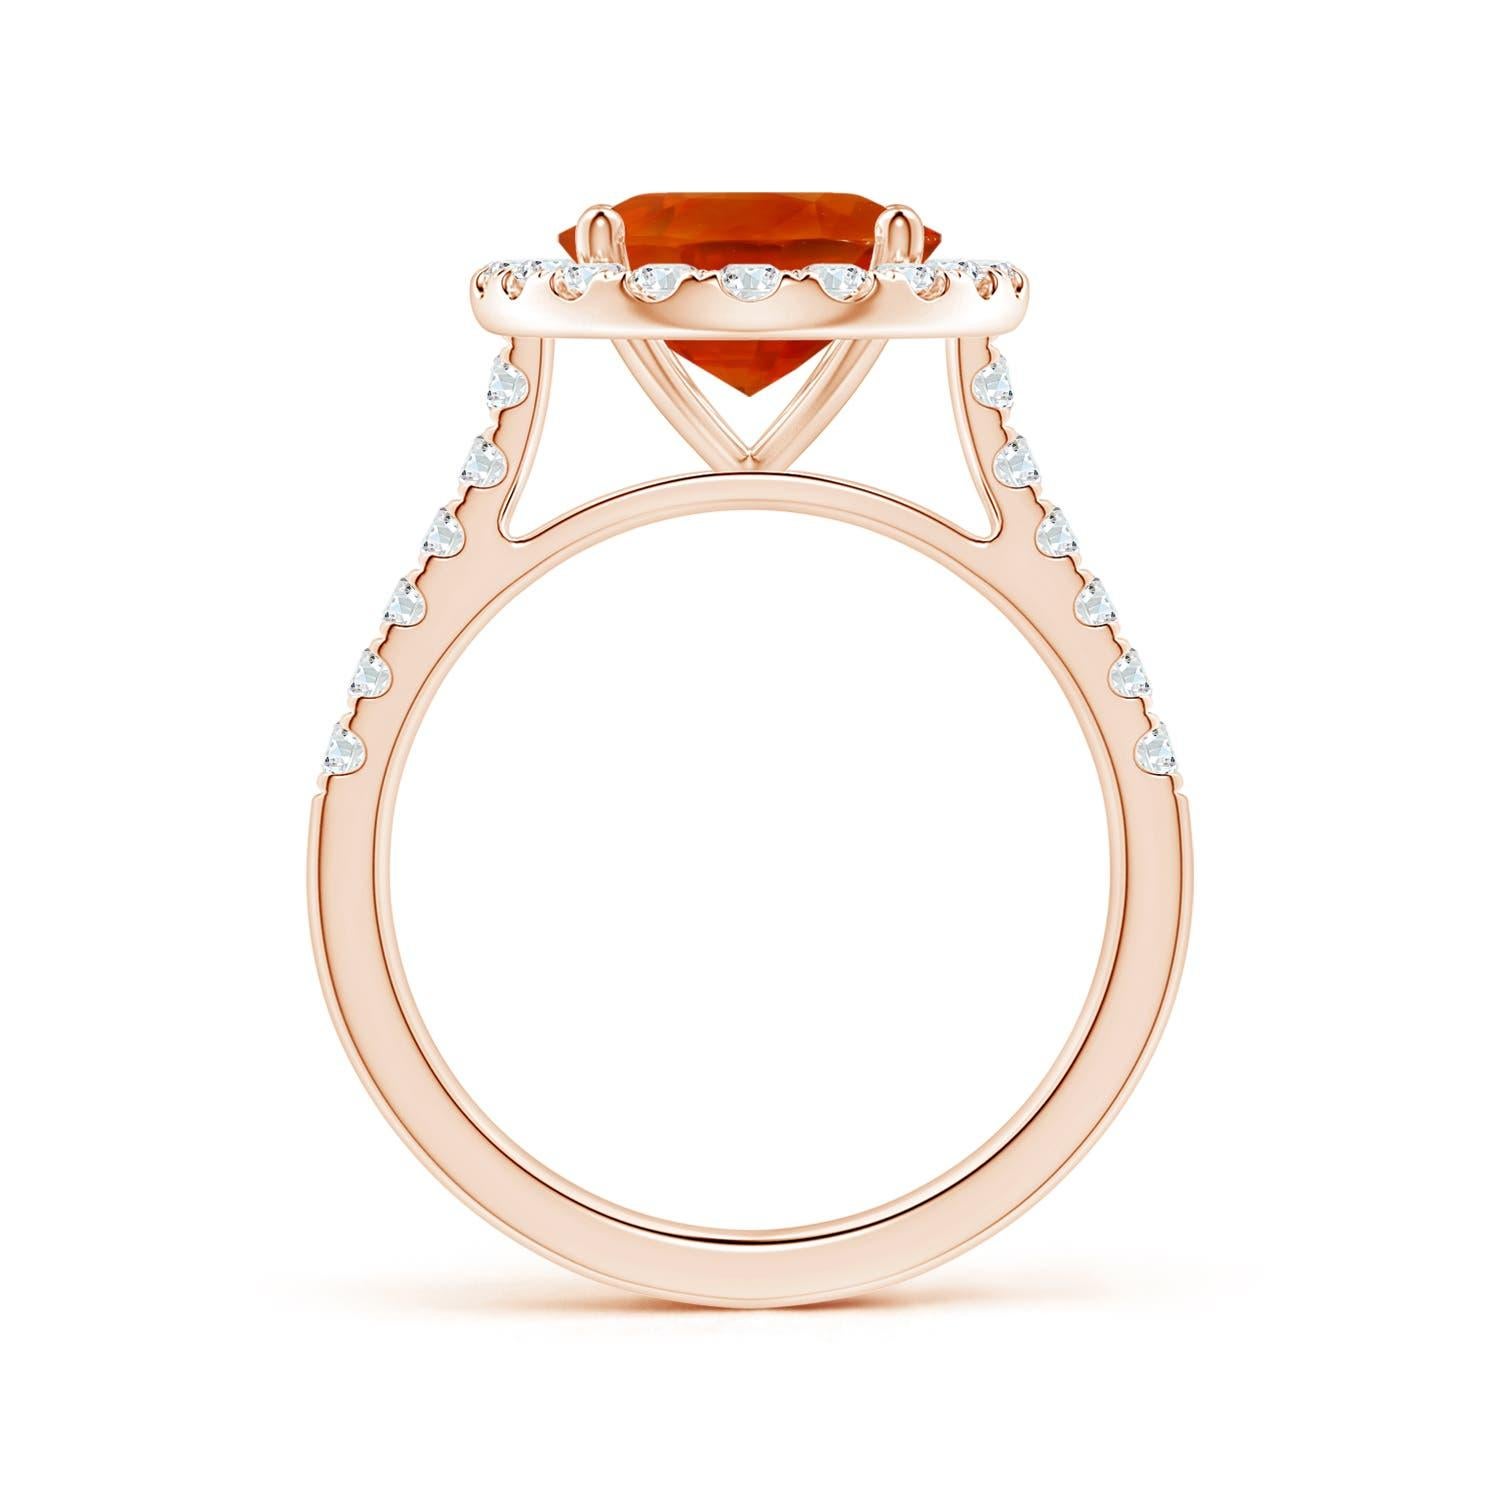 For Sale:  Angara Gia Certified Natural Orange Sapphire Diamond Halo Ring in Rose Gold 2